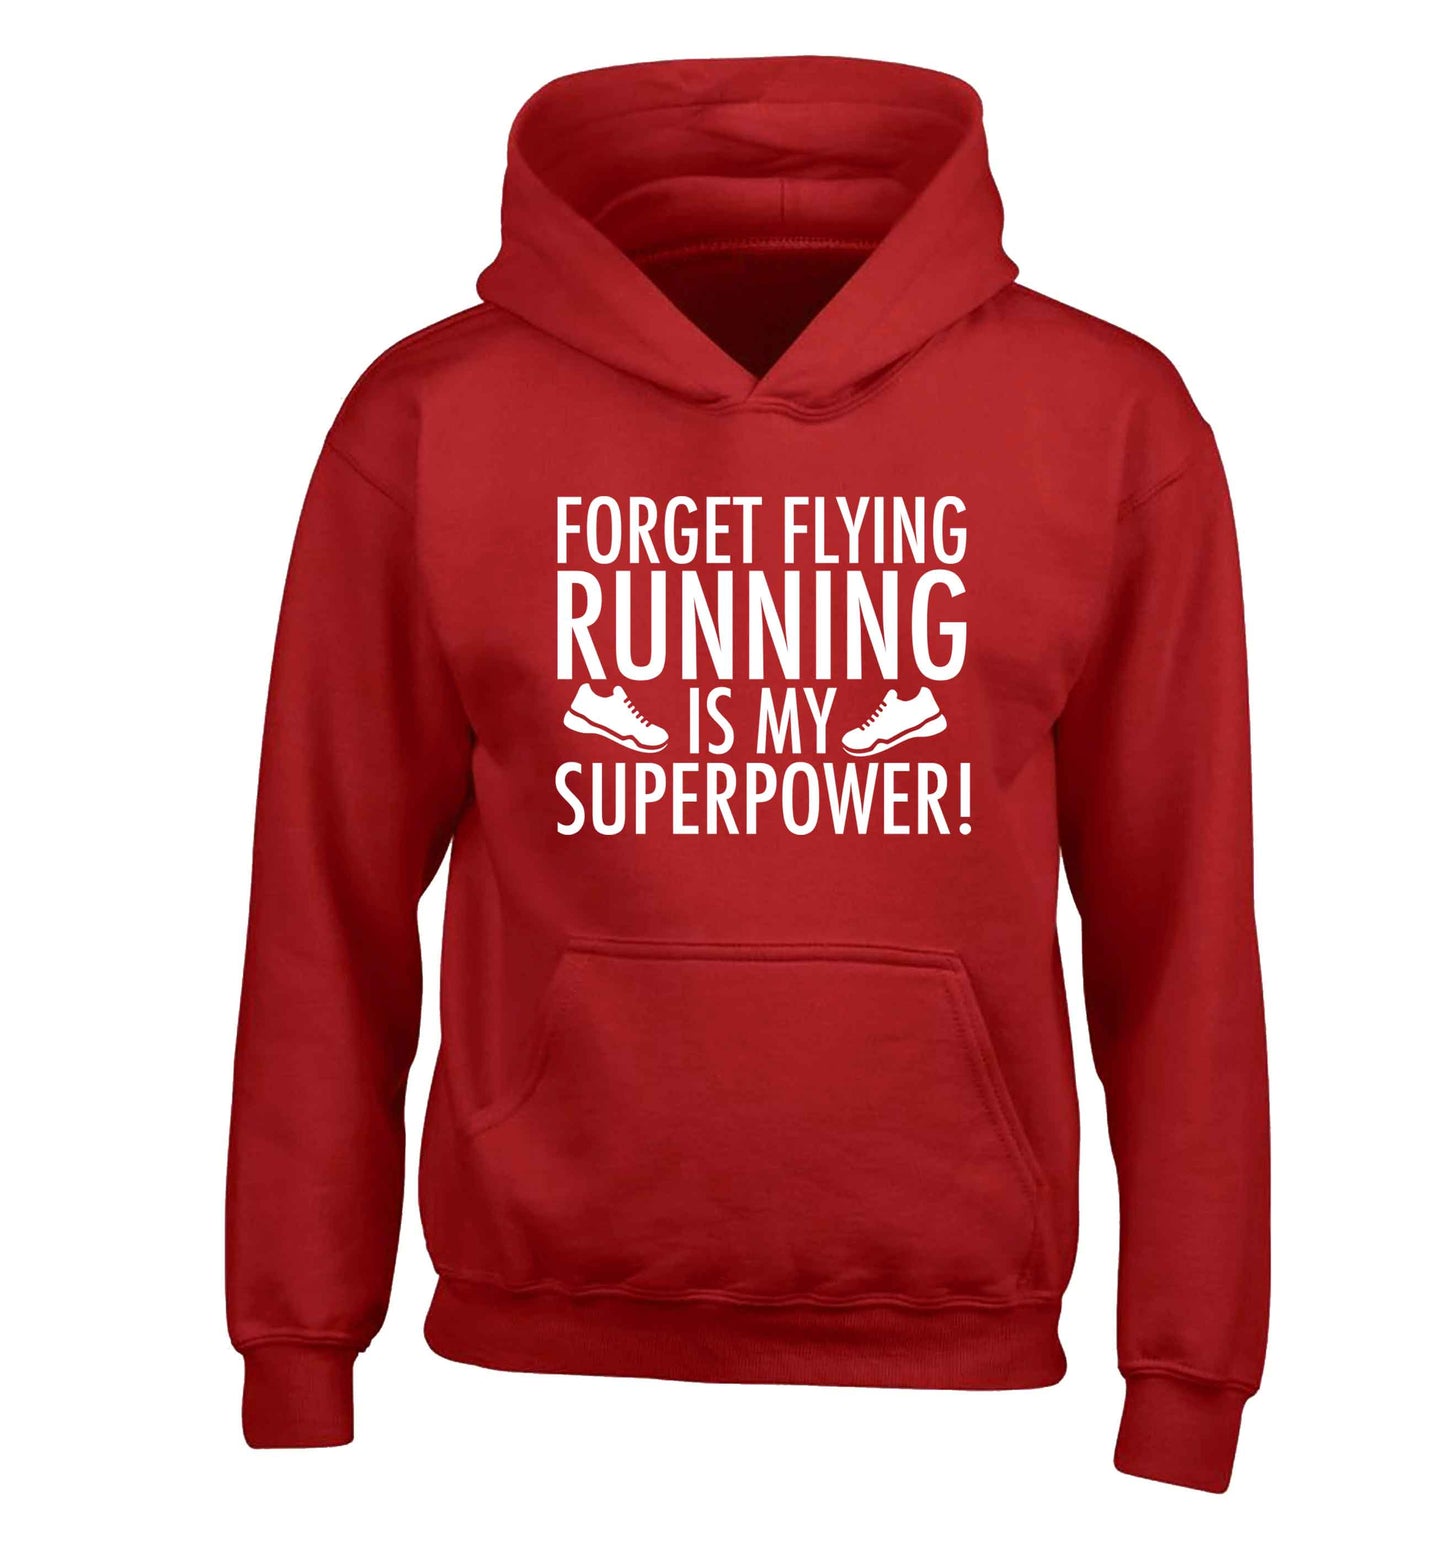 Forget flying running is my superpower children's red hoodie 12-13 Years